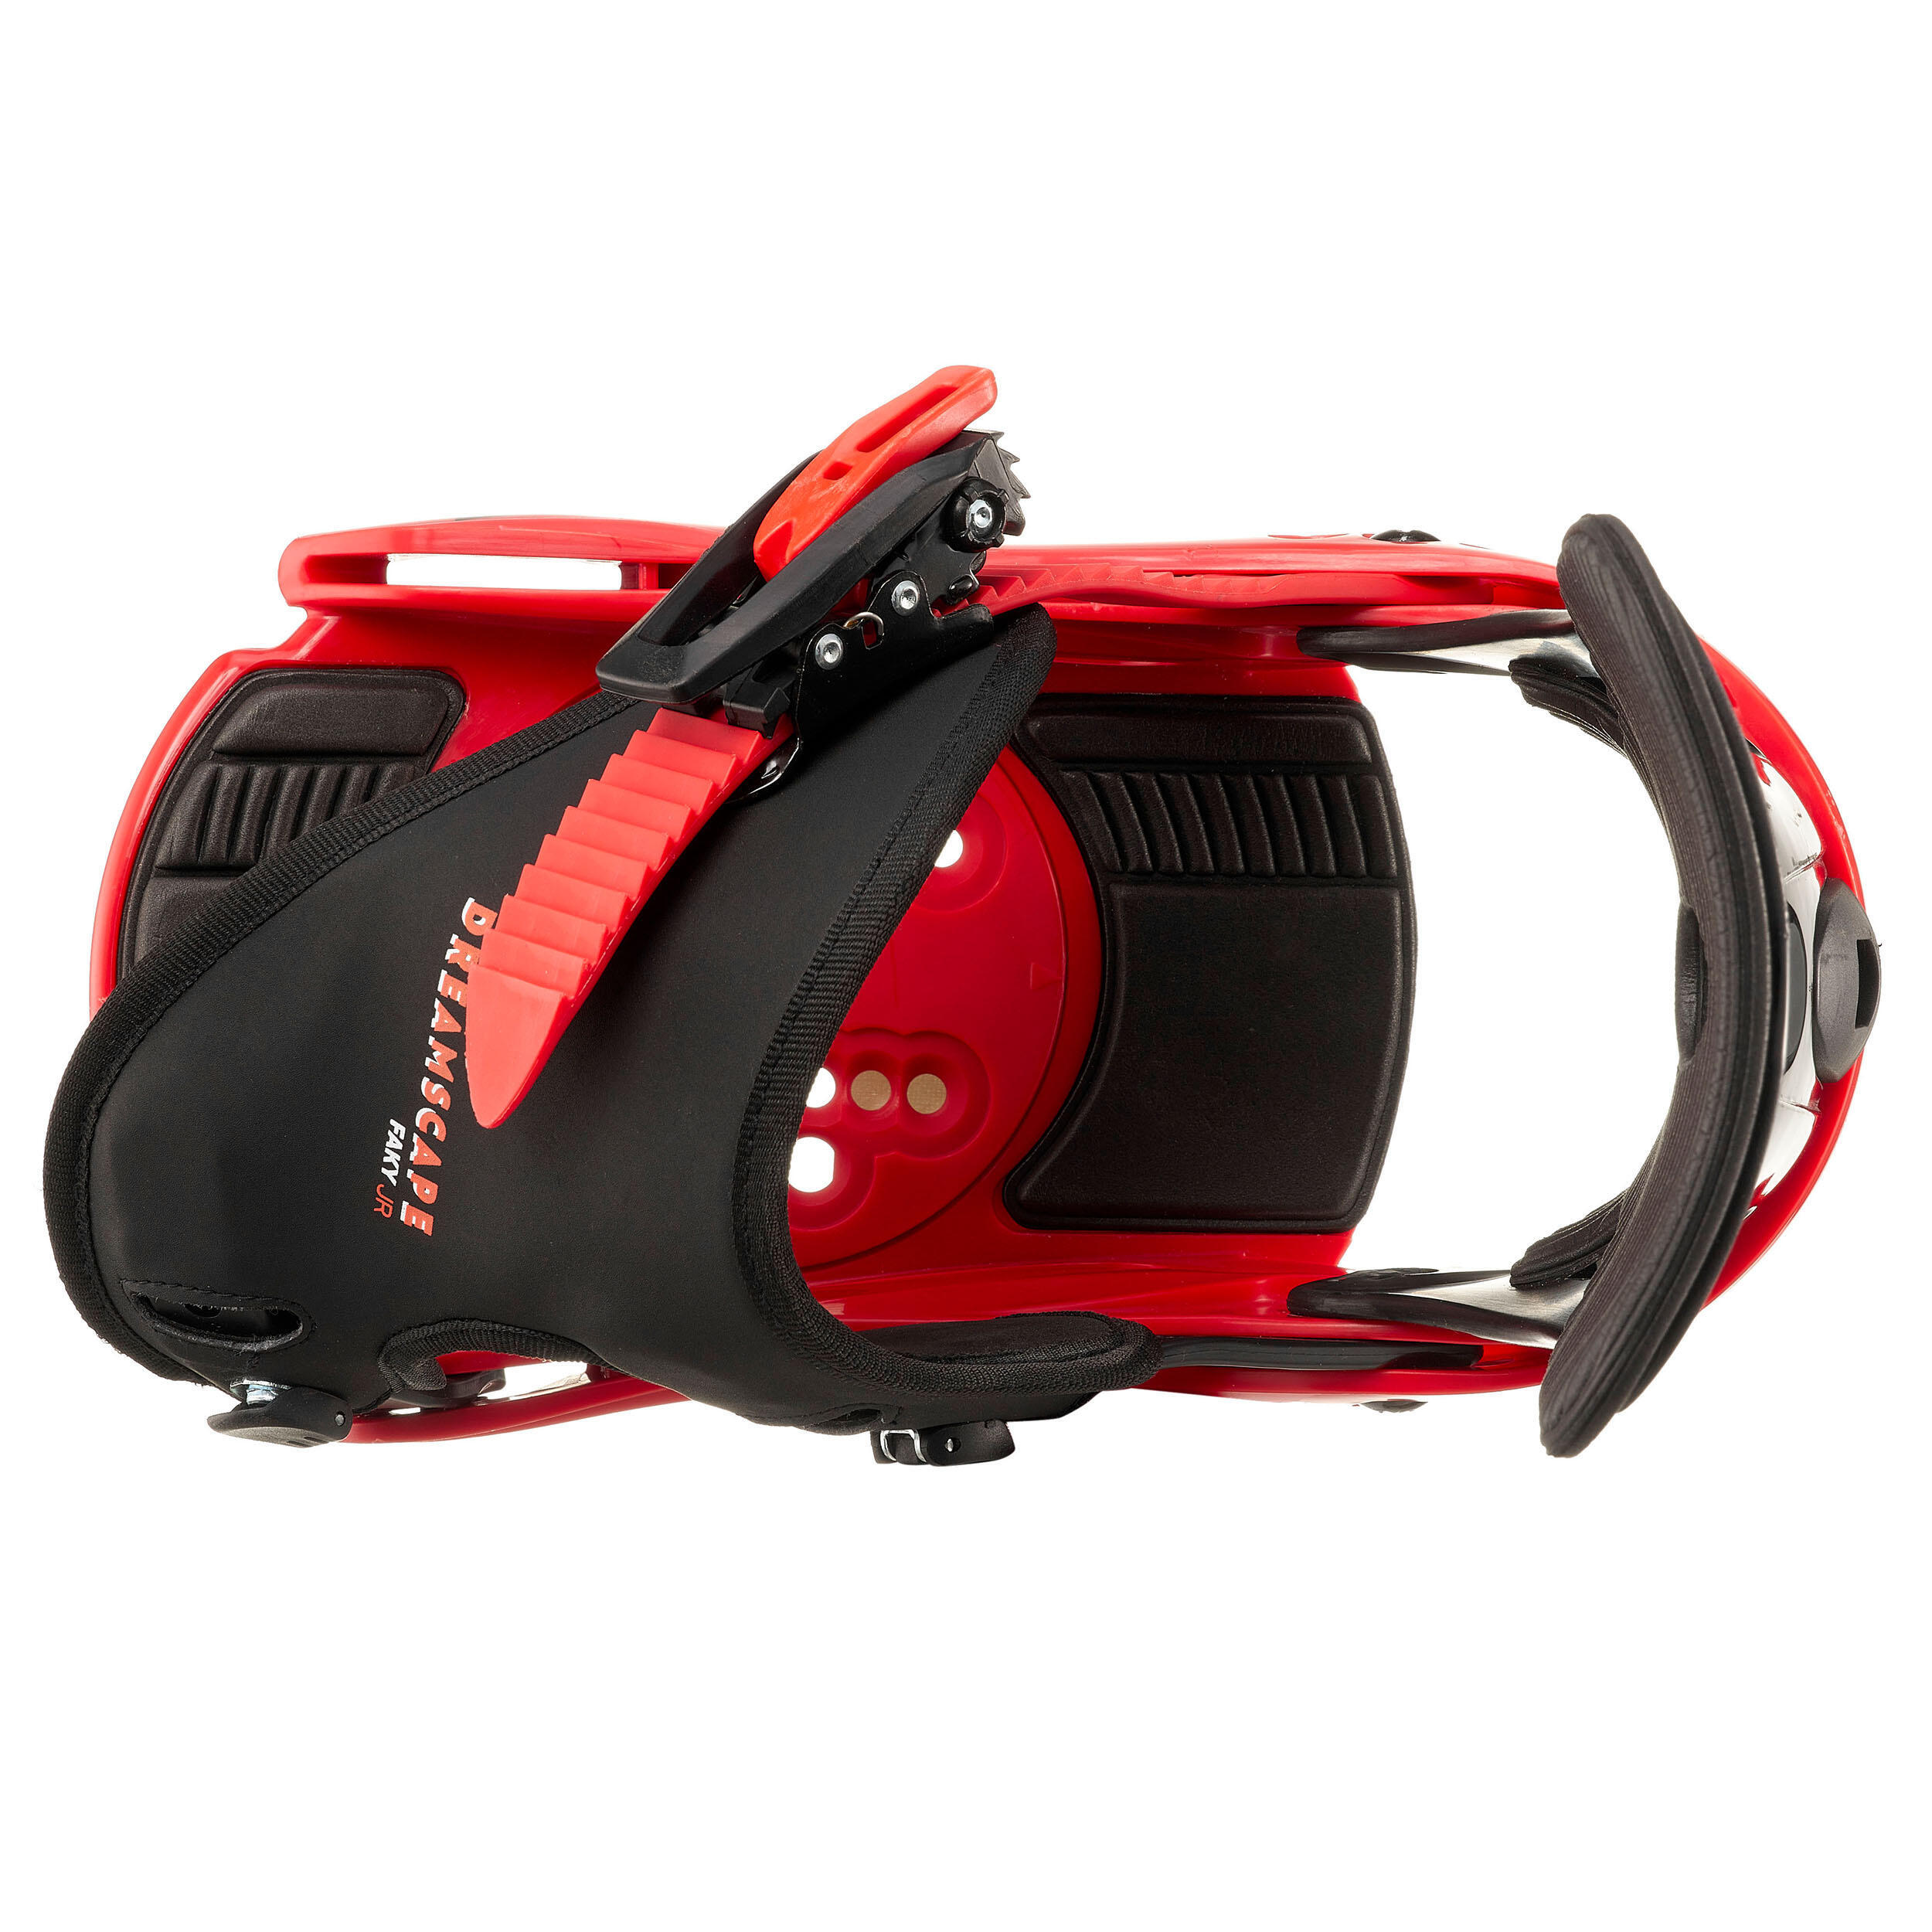 Kids’ Quick Snowboard Bindings  - Faky S - Black and Red 6/9